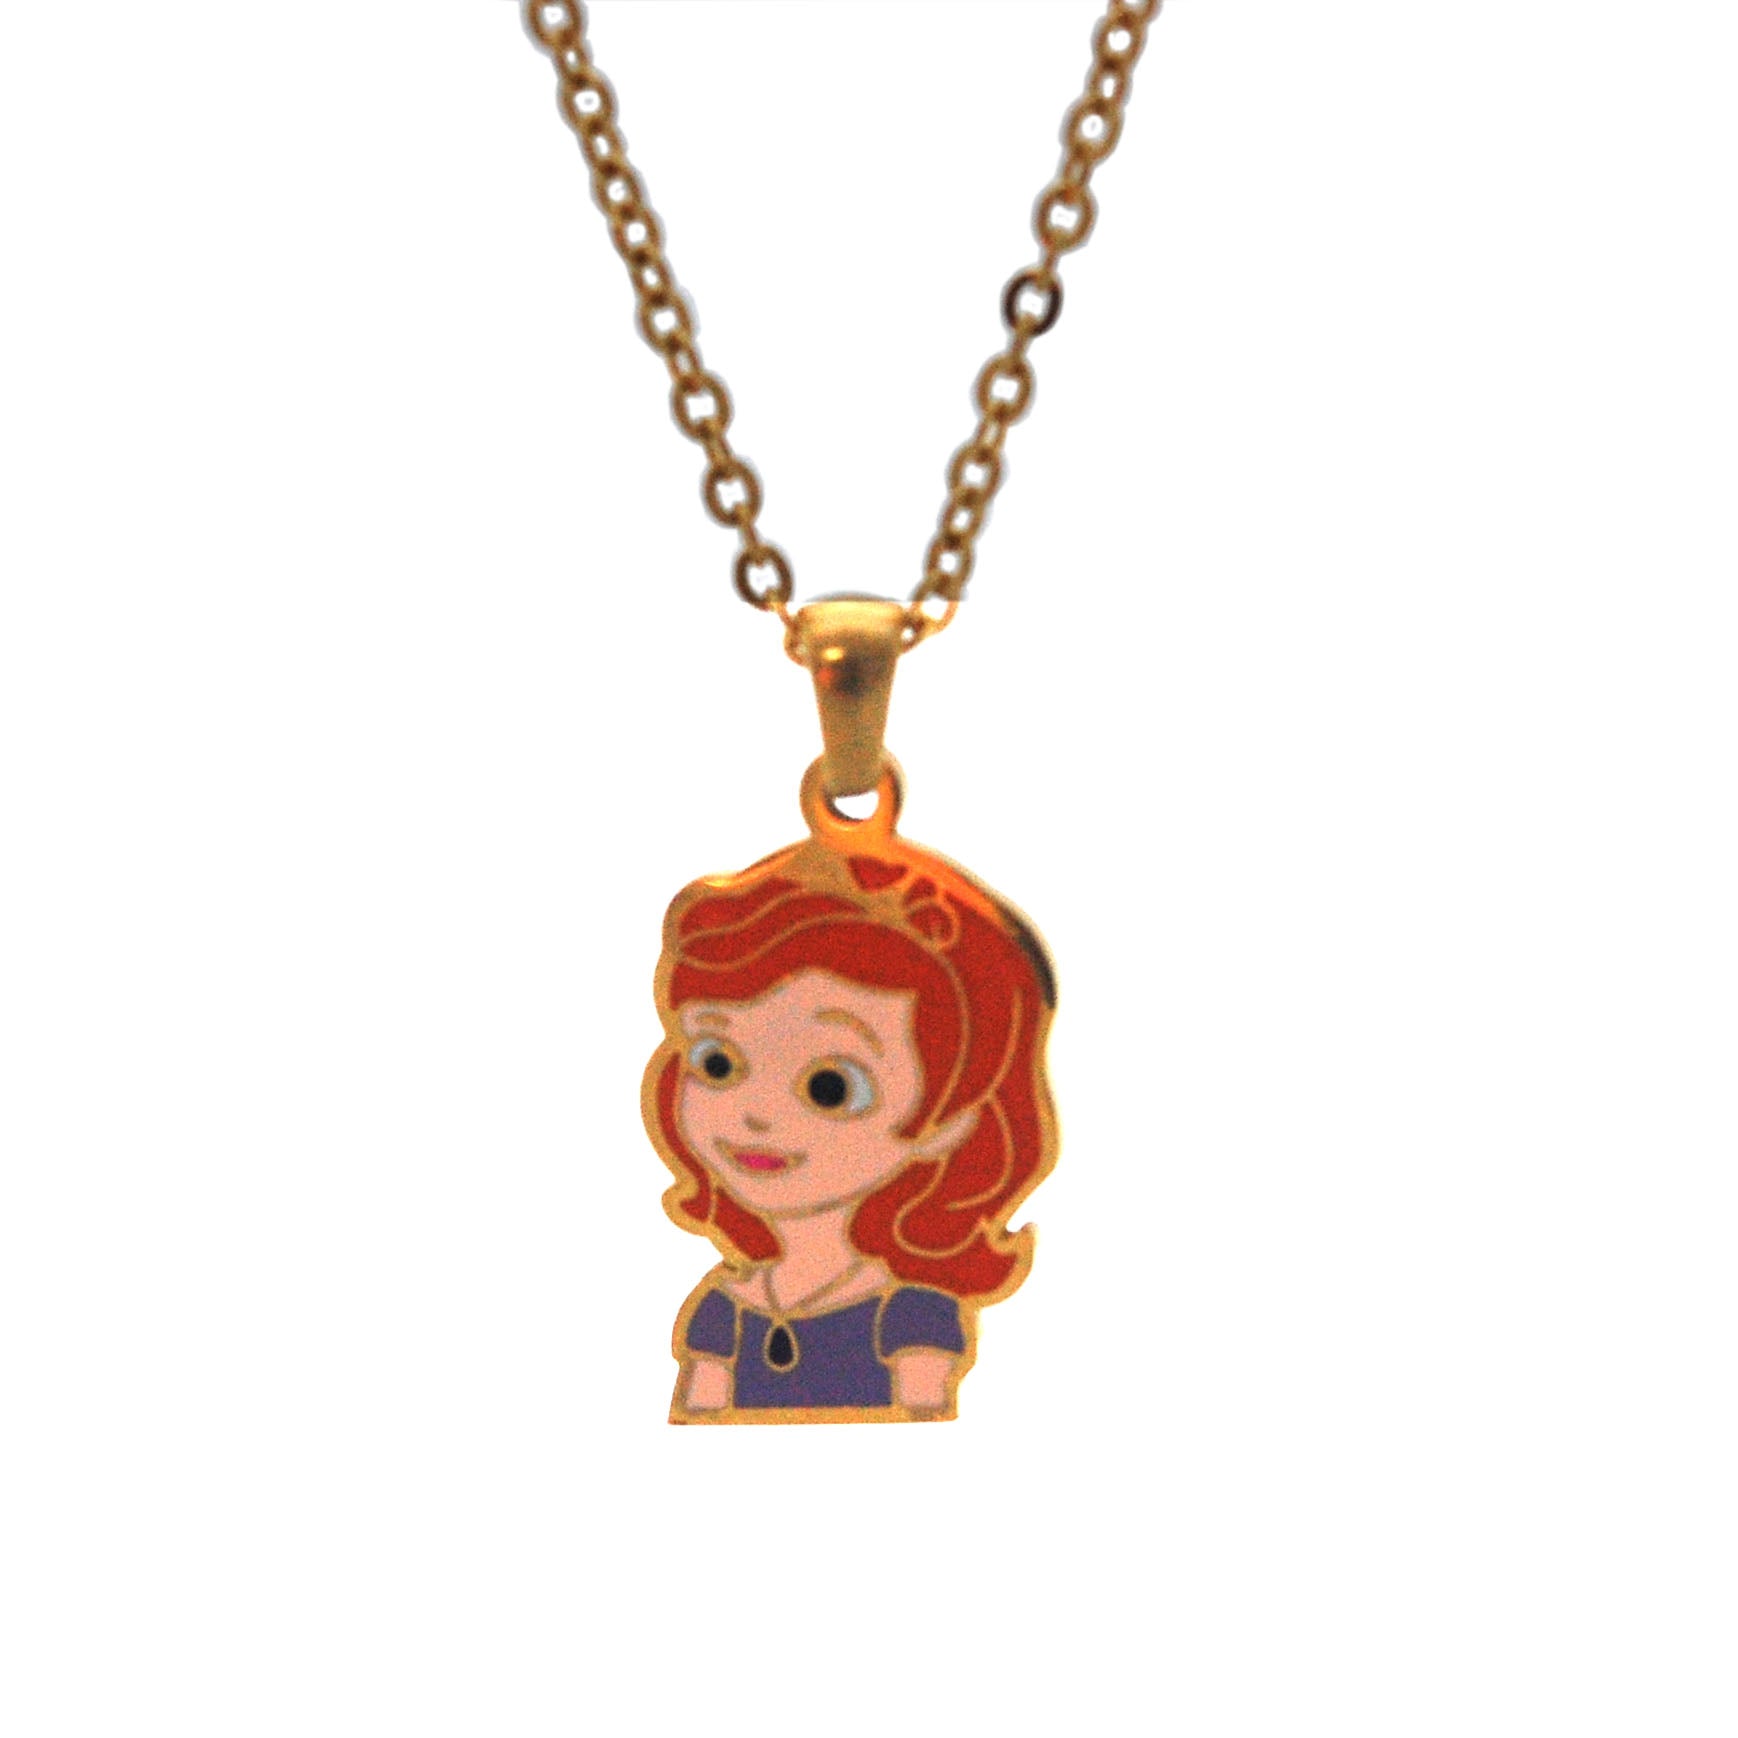 SET 5329: Gold Plated Princess Sofia The First Necklace & Earrings Set